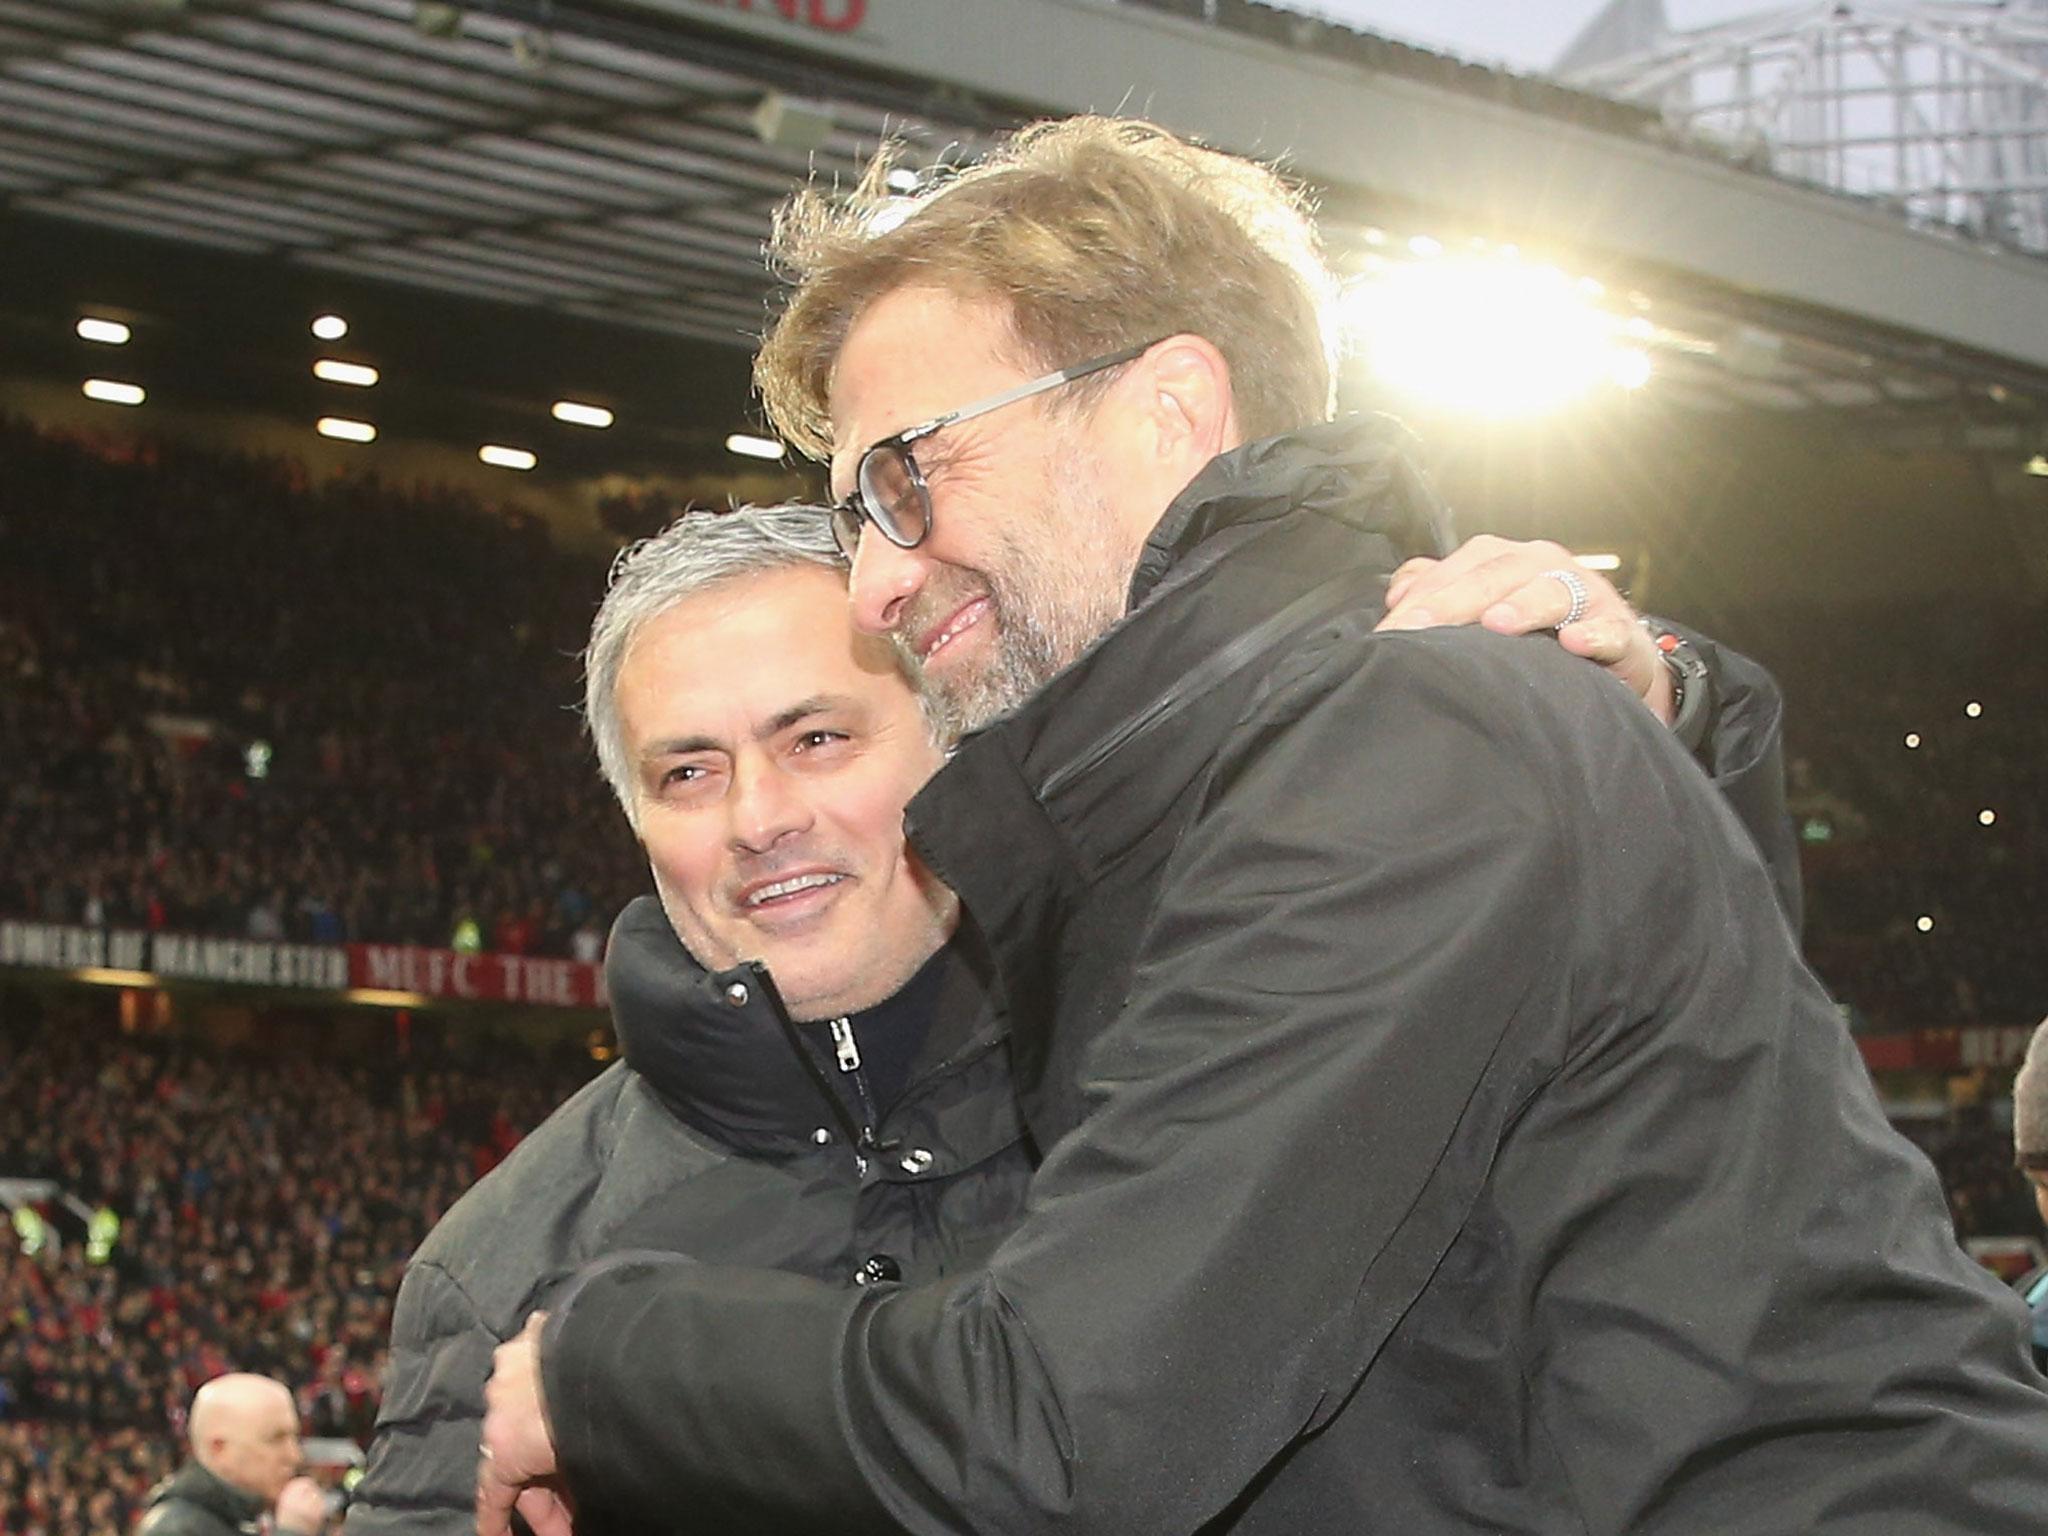 Jose Mourinho and Jurgen Klopp have come to embody a very different kind of Manchester-Liverpool rivalry